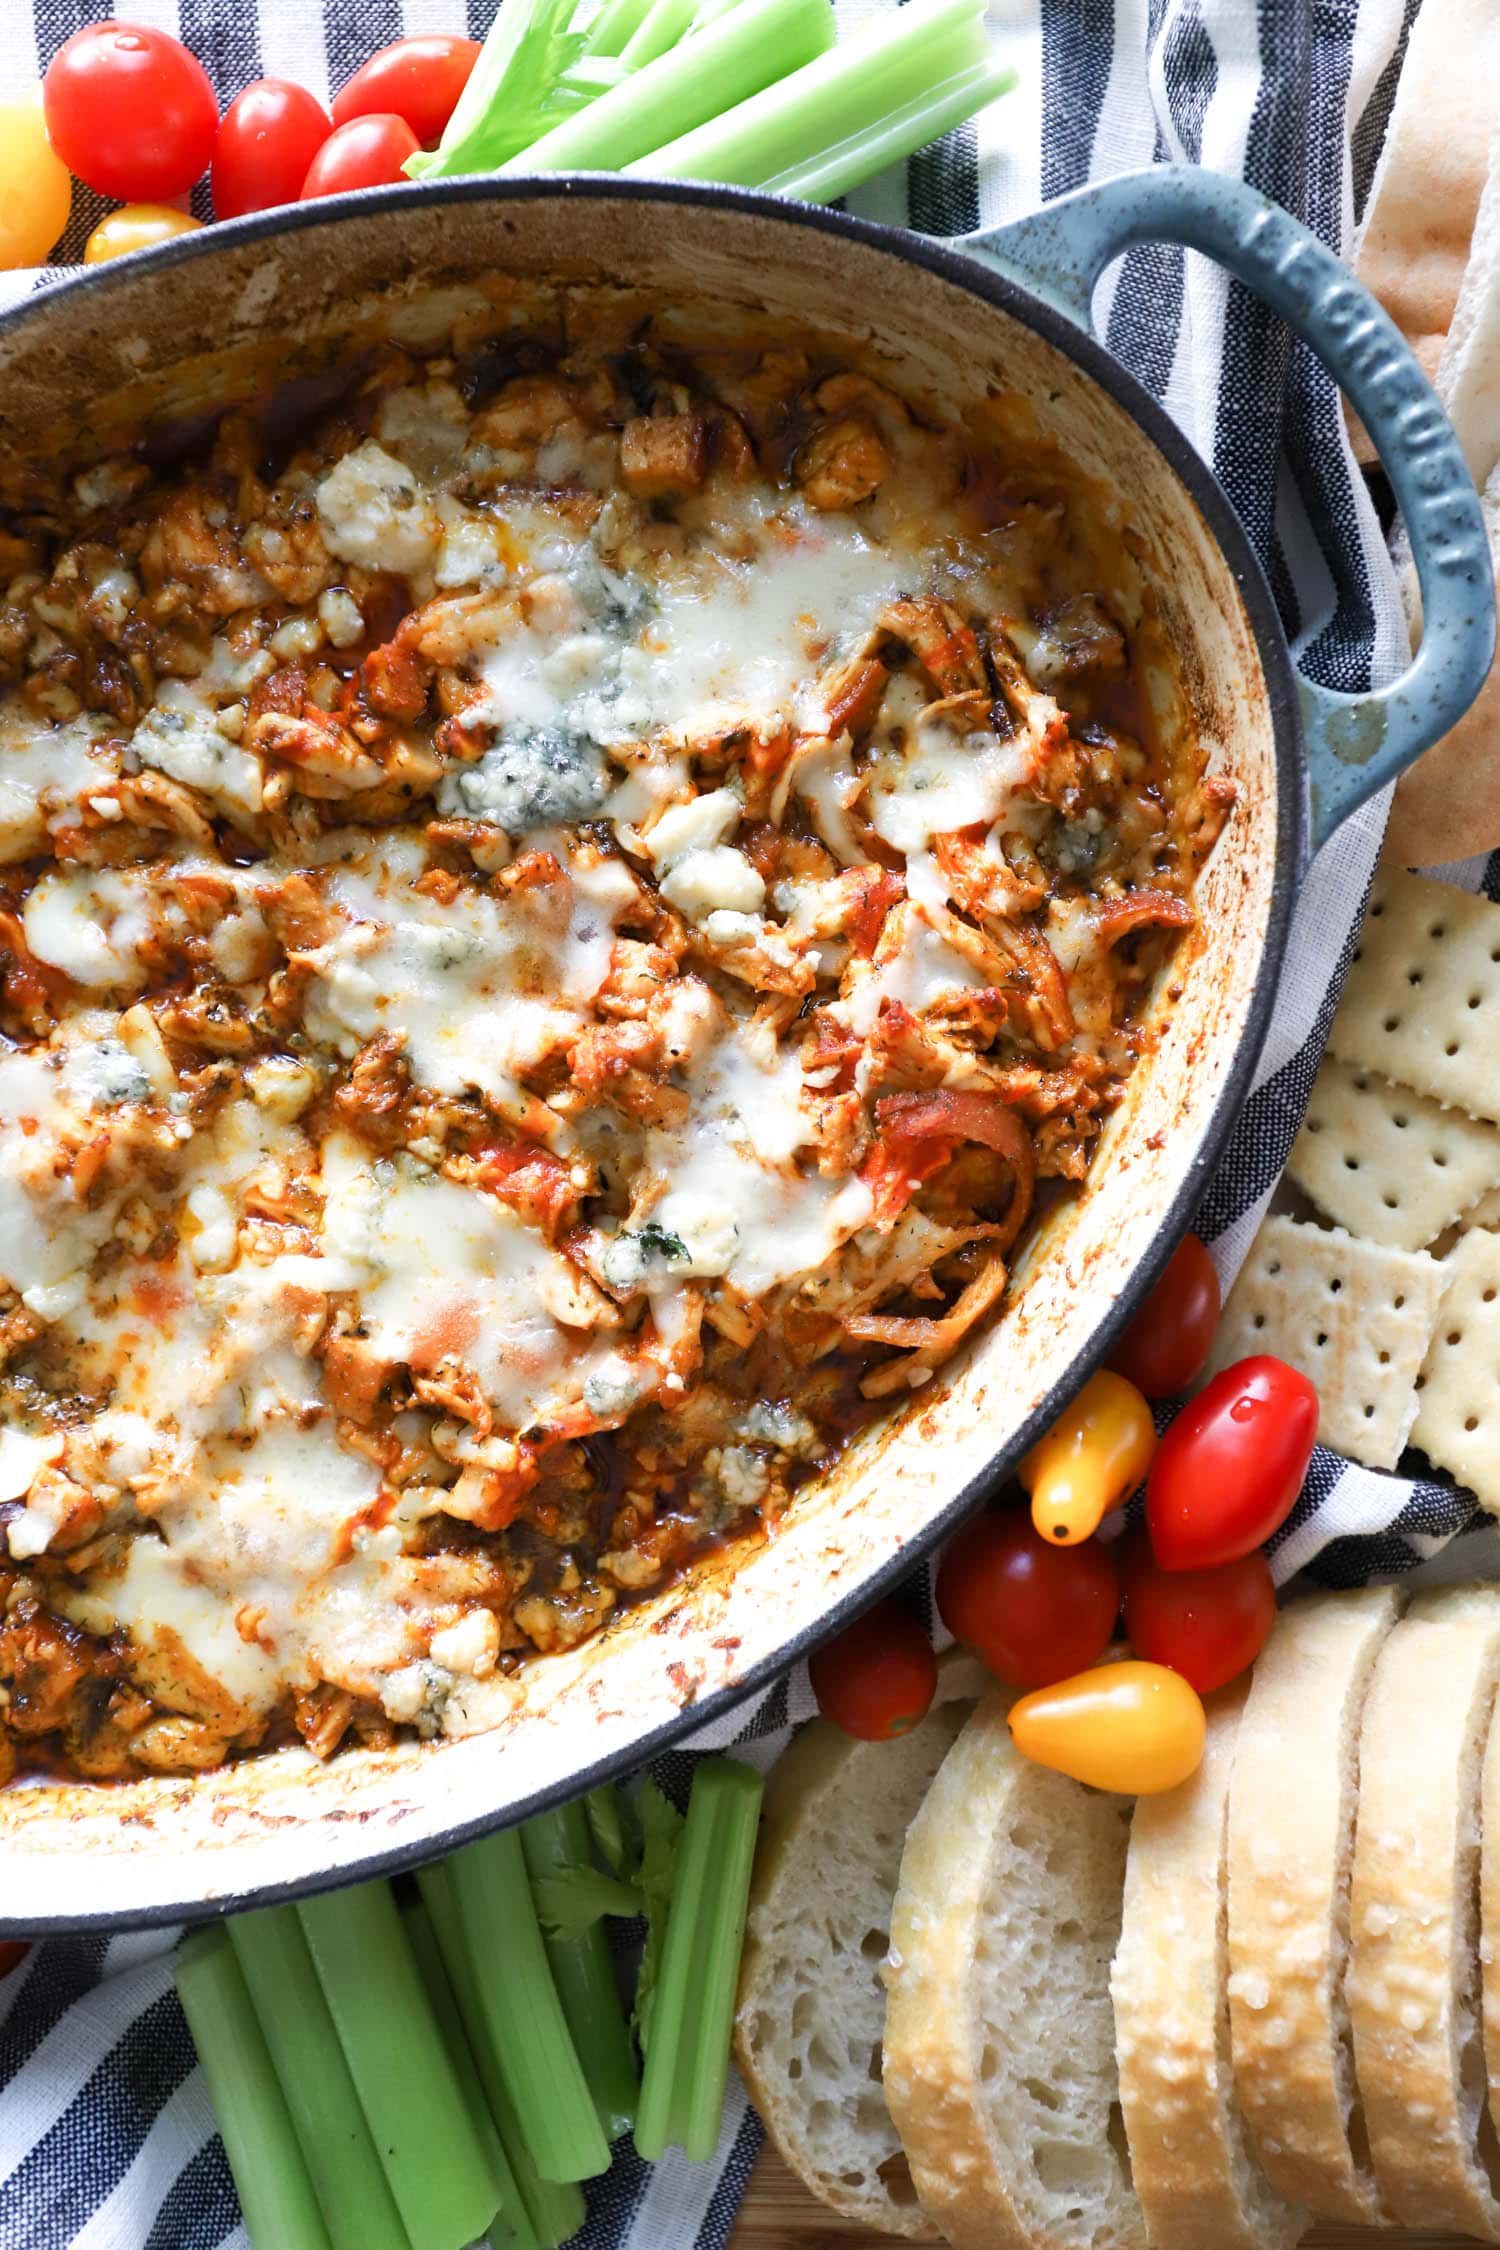 Hot buffalo chicken dip with melted cheese on top in blue skillet surrounded by veggies.